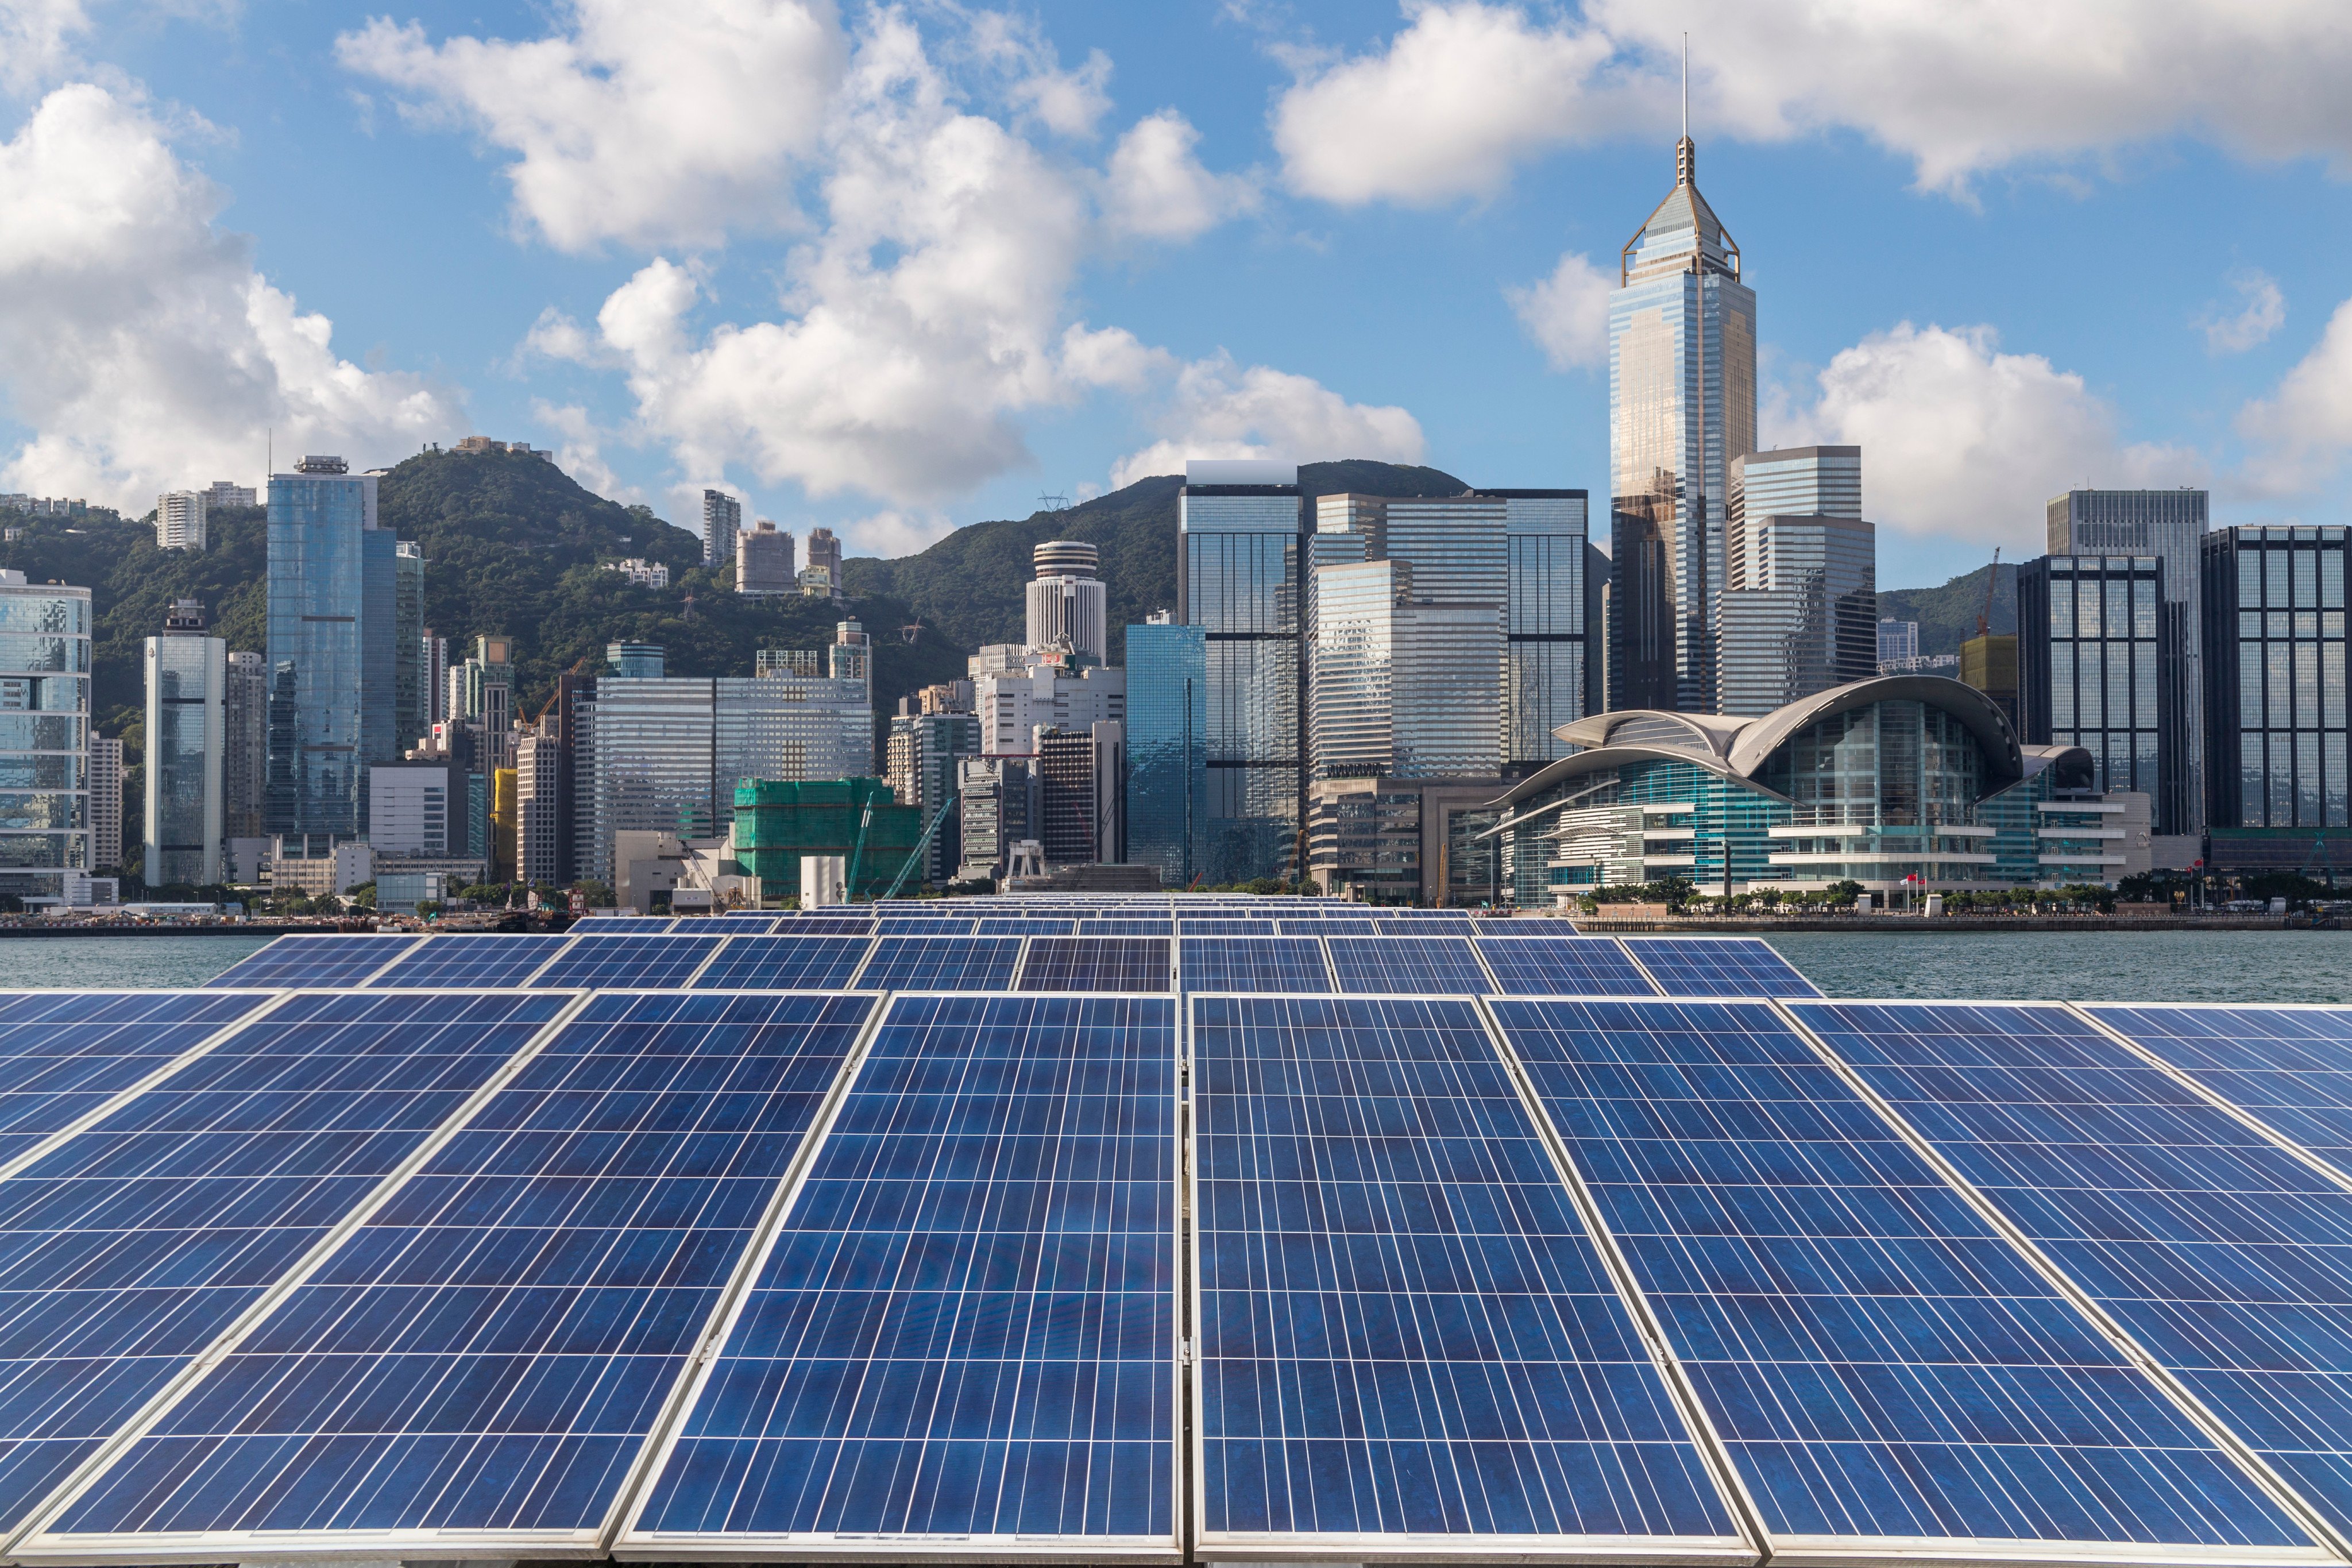 Hong Kong investors lag the rest of Asia on ESG, with only 29 per cent holding sustainable funds in their portfolio. Photo: Shutterstock